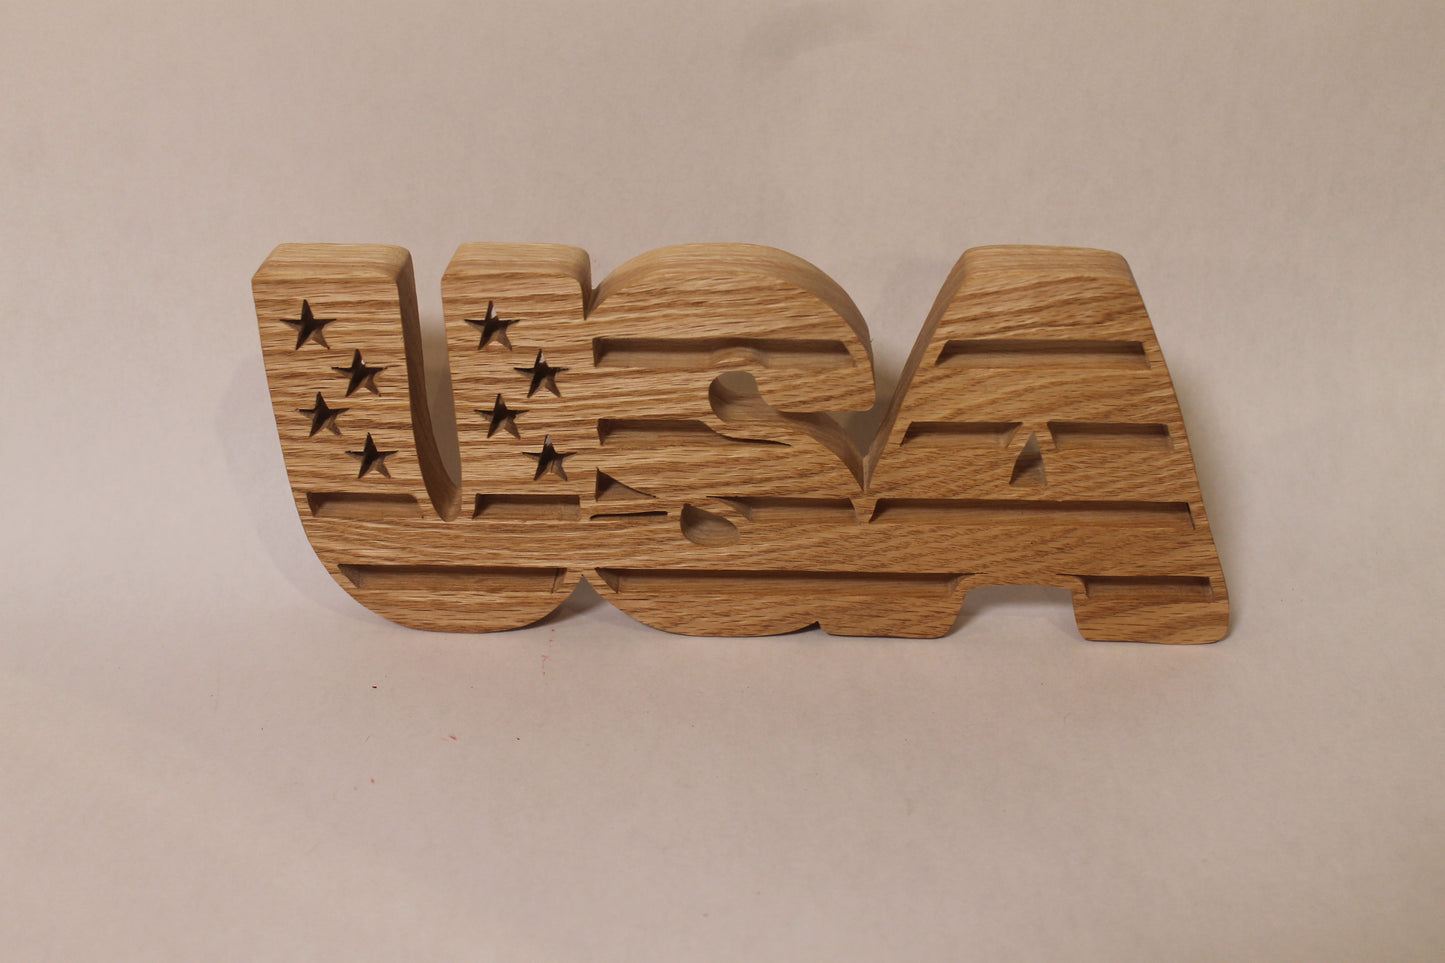 USA sign for desk, shelf, or wall hanging